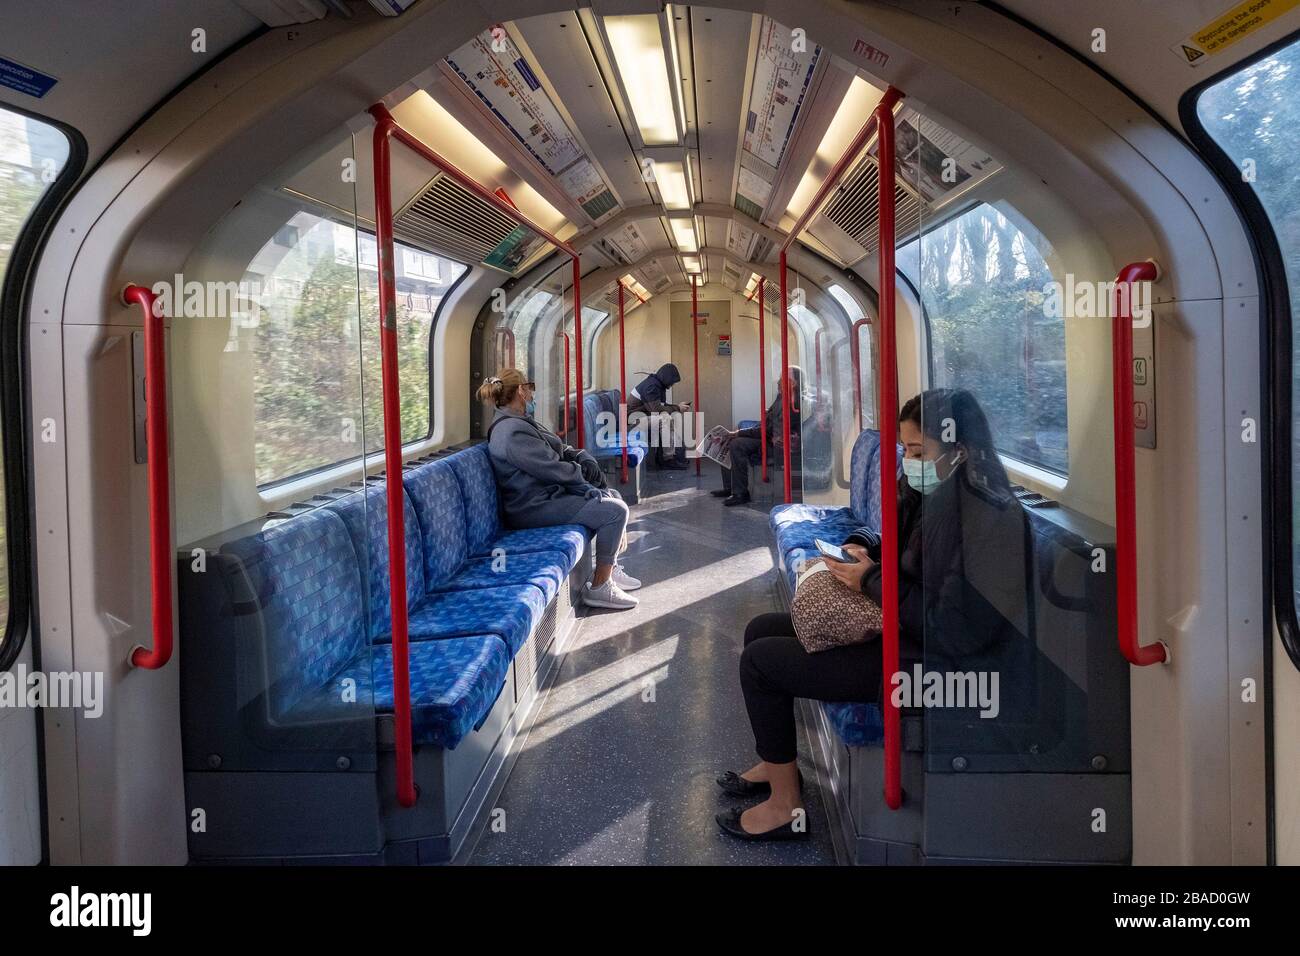 London, UK. 26th Mar, 2020. Passengers travelling on a tube train observe two metres social distancing in London, Britain on March 26, 2020. The British government said on Thursday that the number of confirmed COVID-19 cases in the country has risen to 11,658 as single-day deaths topped 100 for the first time since the outbreak of the disease. Credit: Ray Tang/Xinhua/Alamy Live News Stock Photo